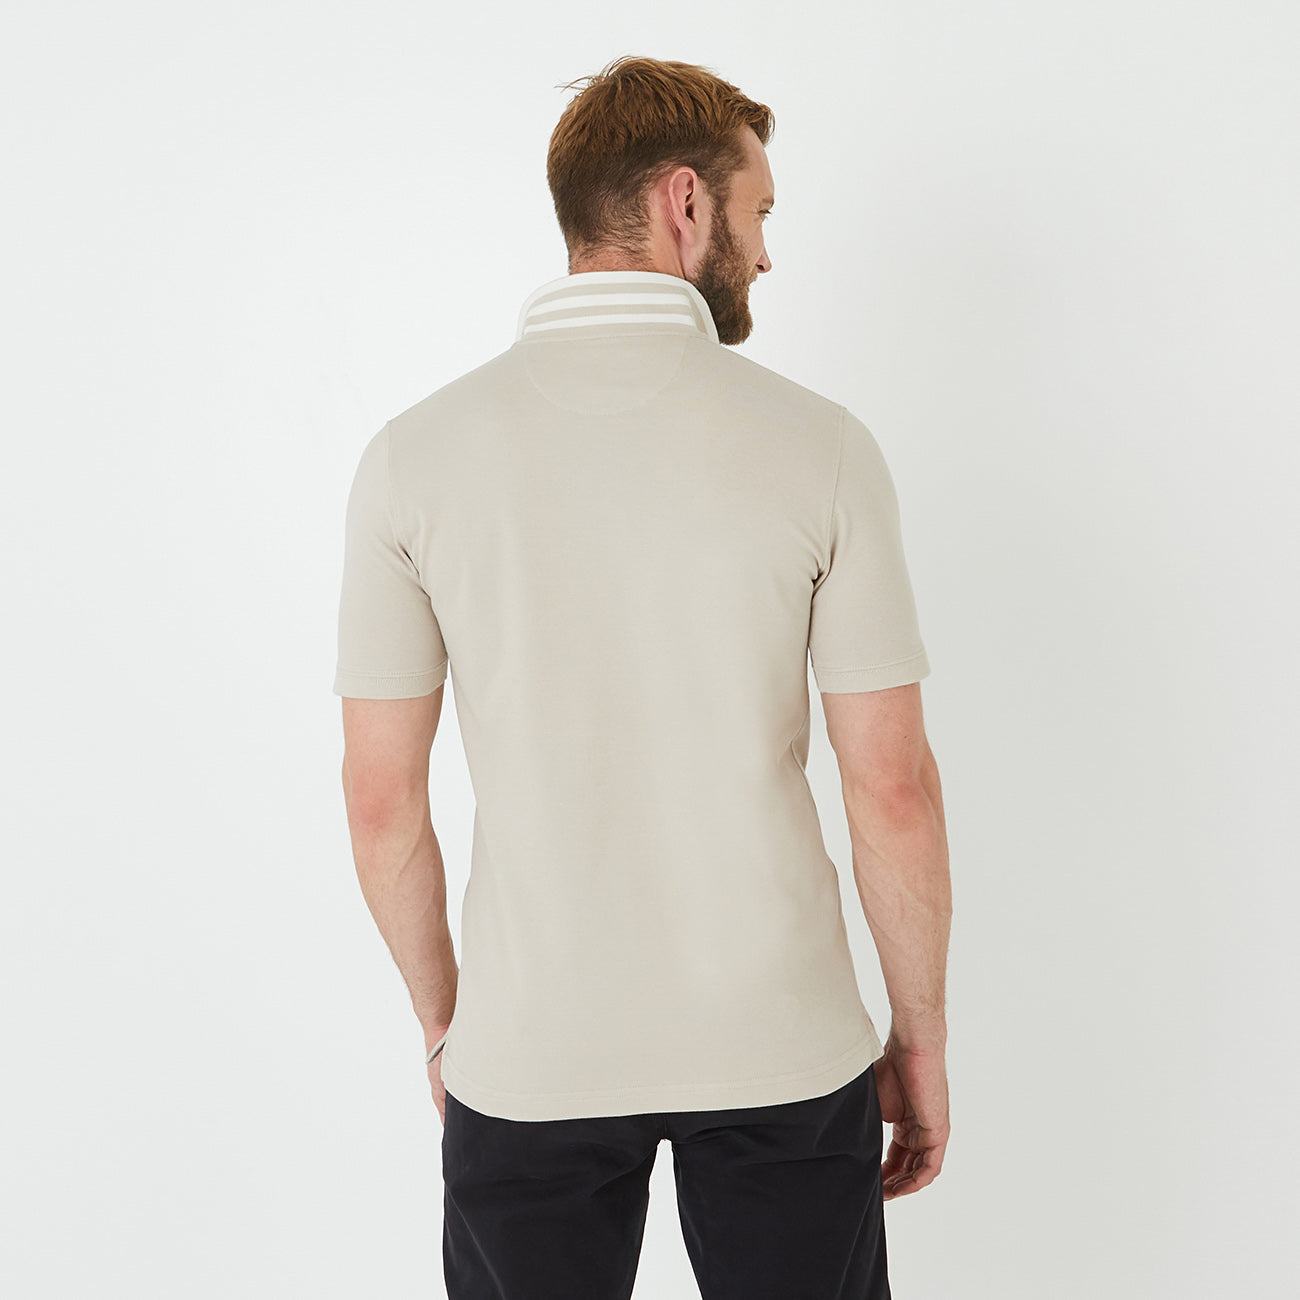 Eden Park Classic Beige Poloshirt with short sleeves and a classic collar poloshirt made from soft cotton pique. Available at StylishGuy Menswear Boutique Dublin.